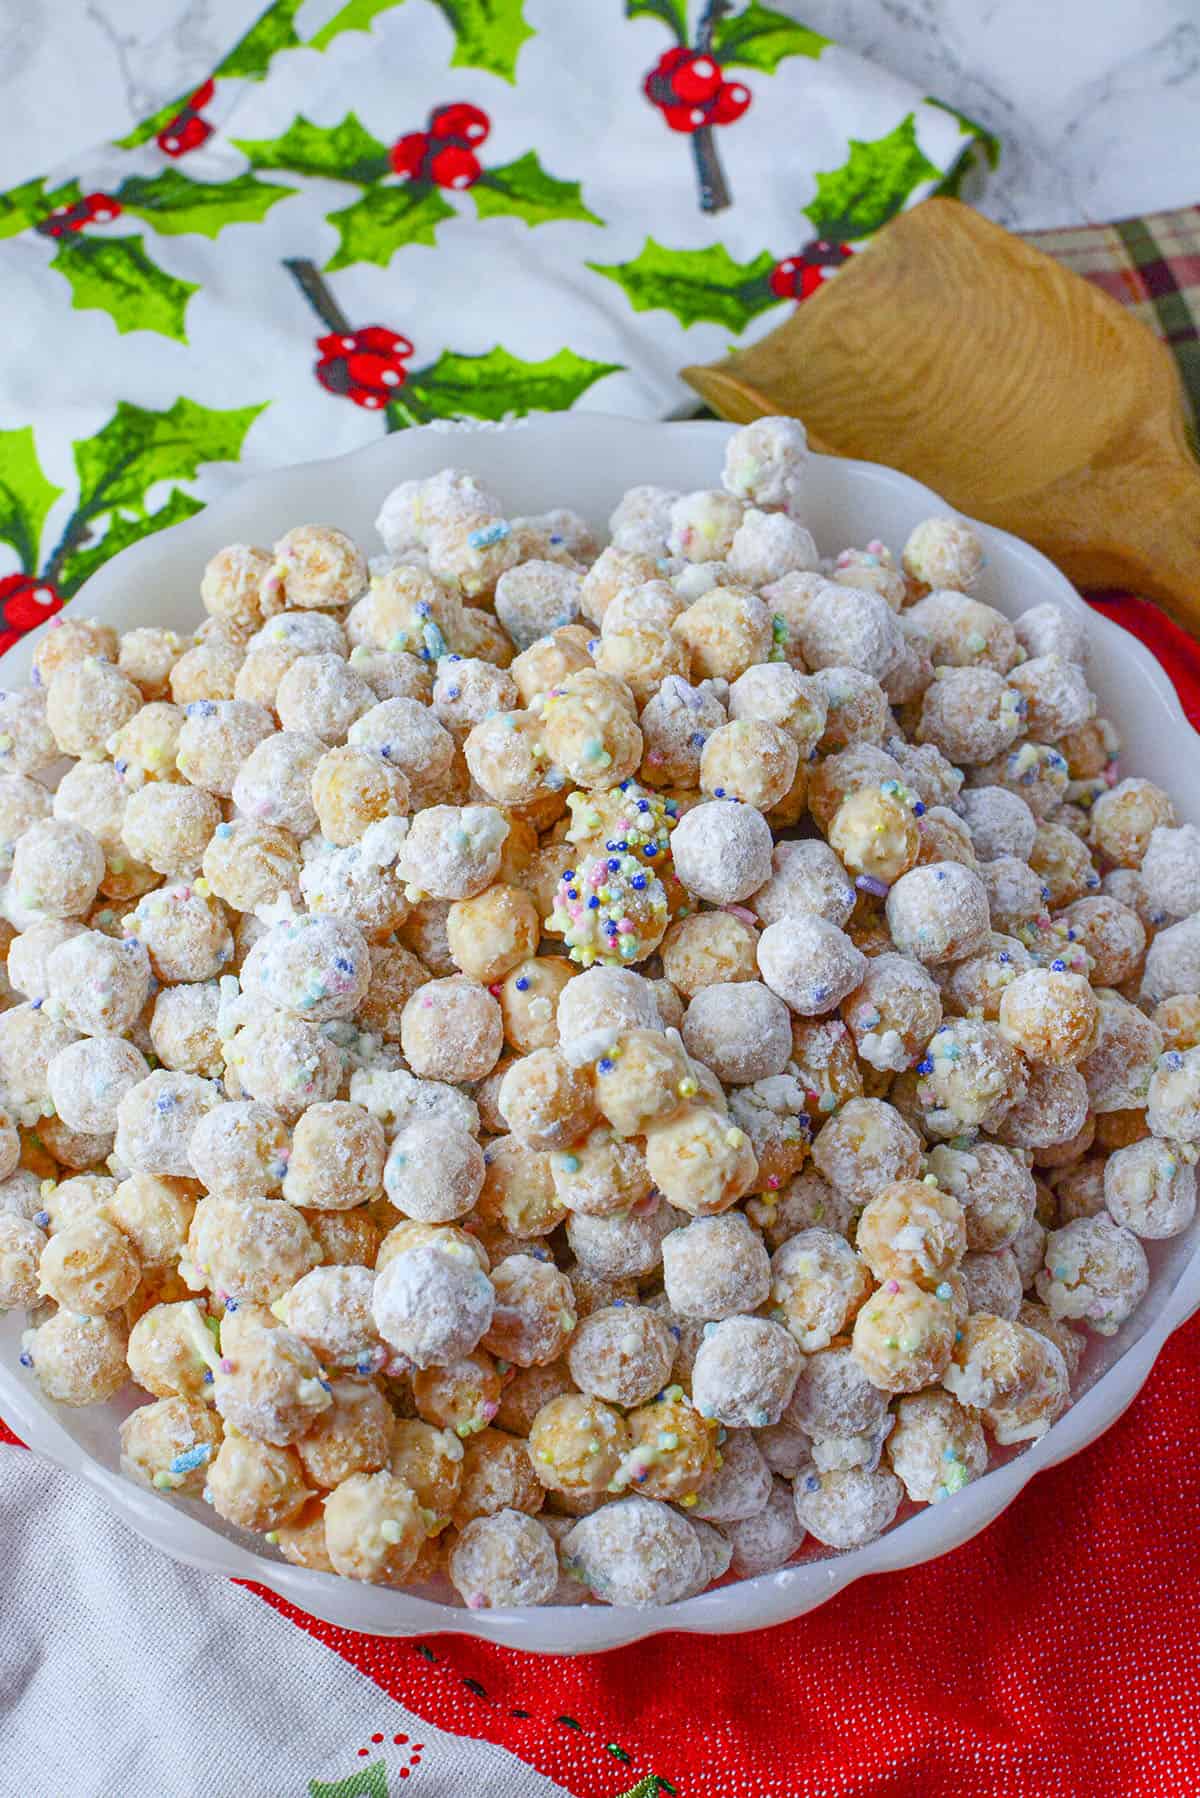 Snowy looking corn pop cereal with sprinkles in a white bowl on a red holiday napkin.